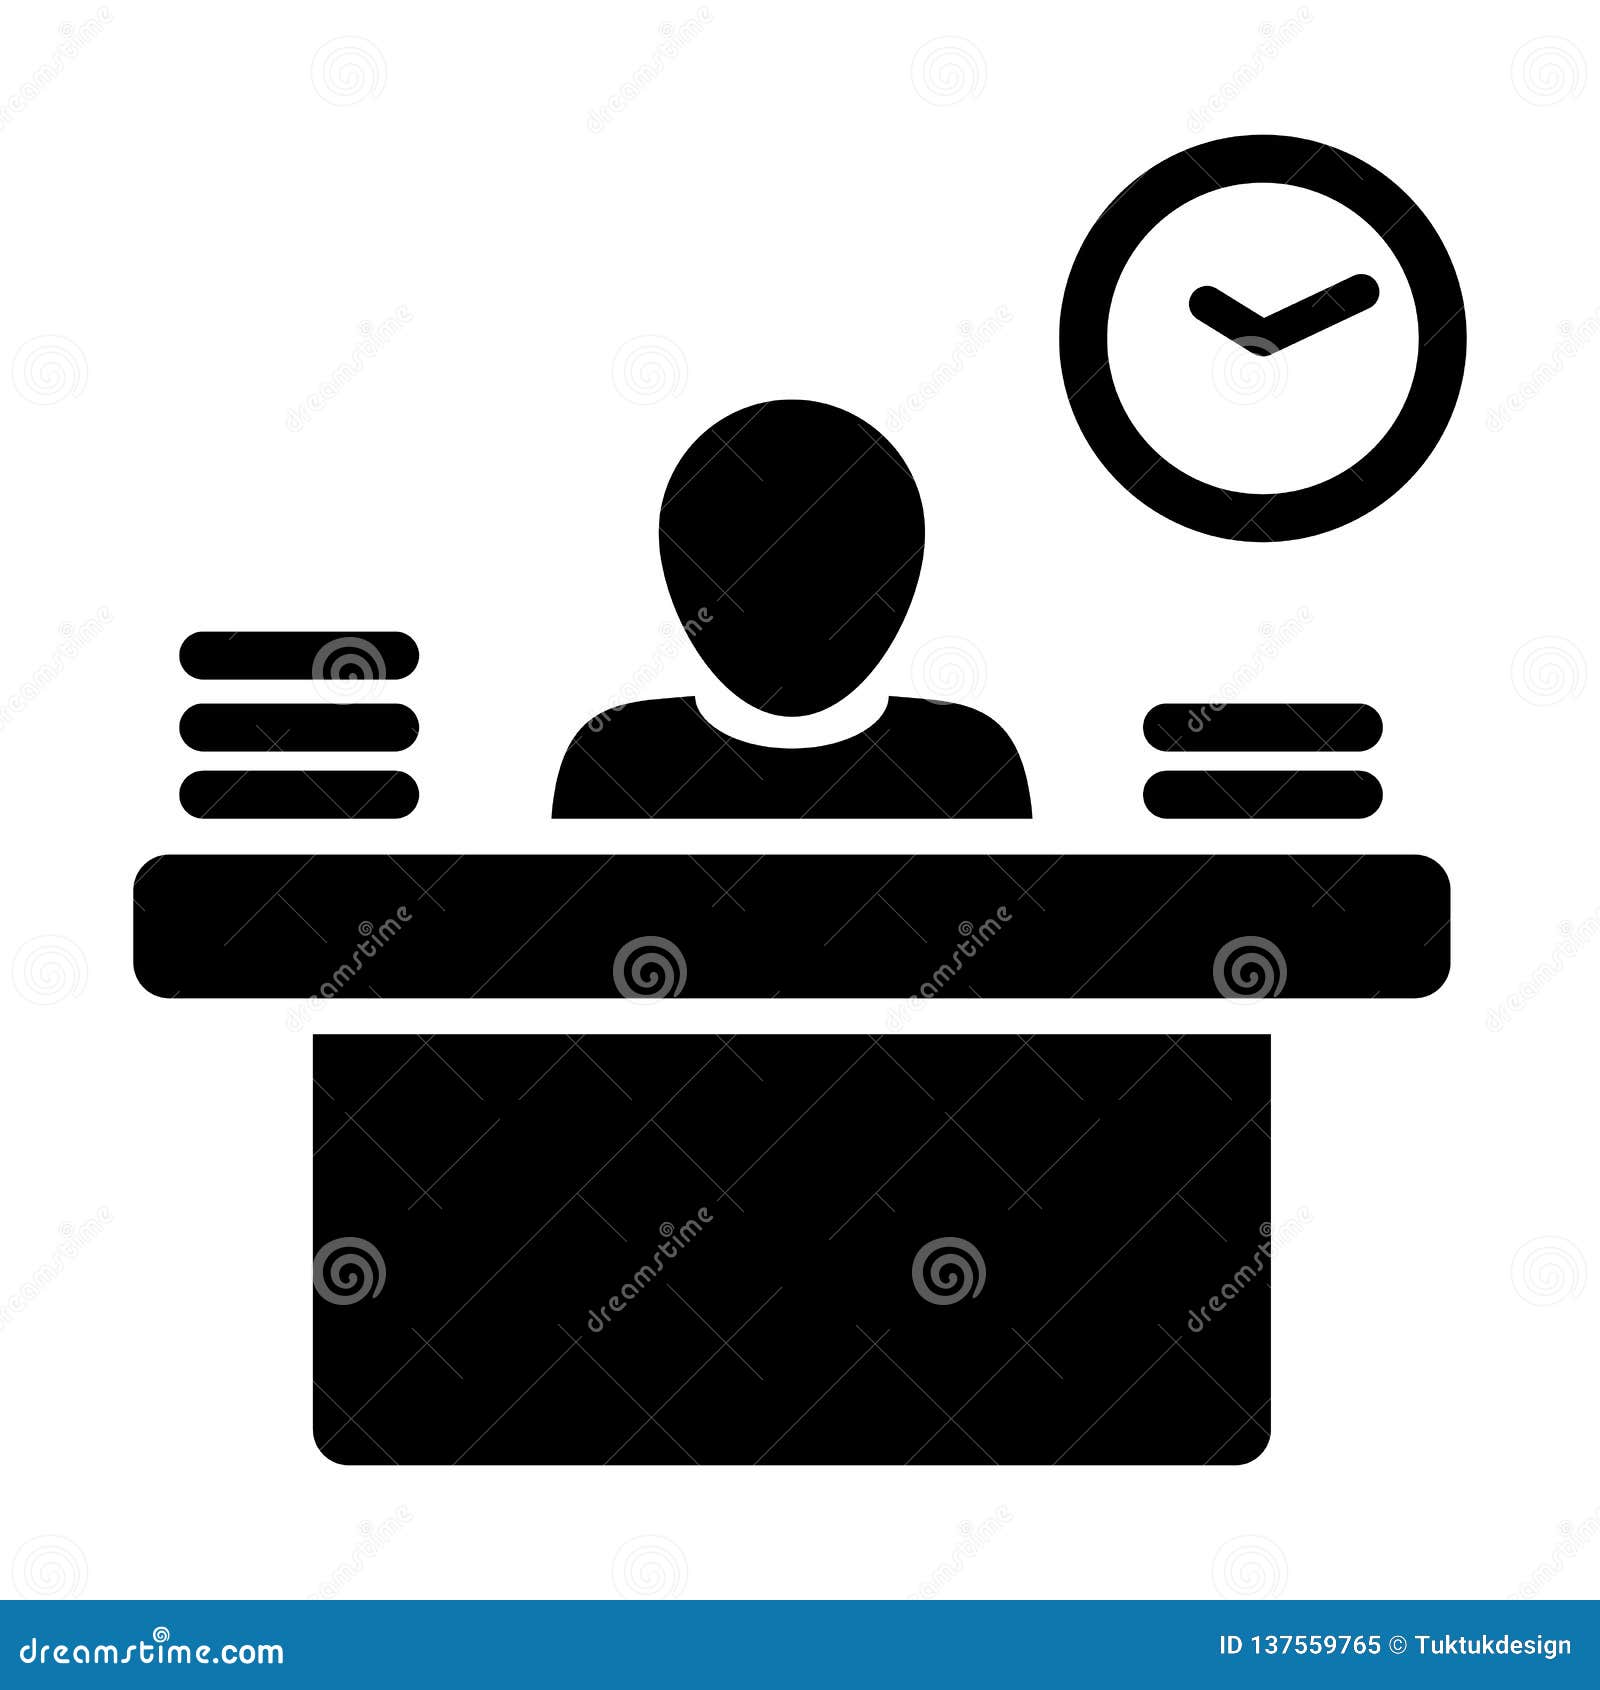 Office Worker Icon Person Working on Desk with Files and Books in Glyph  Pictogram Stock Vector - Illustration of avatar, clip: 137559765